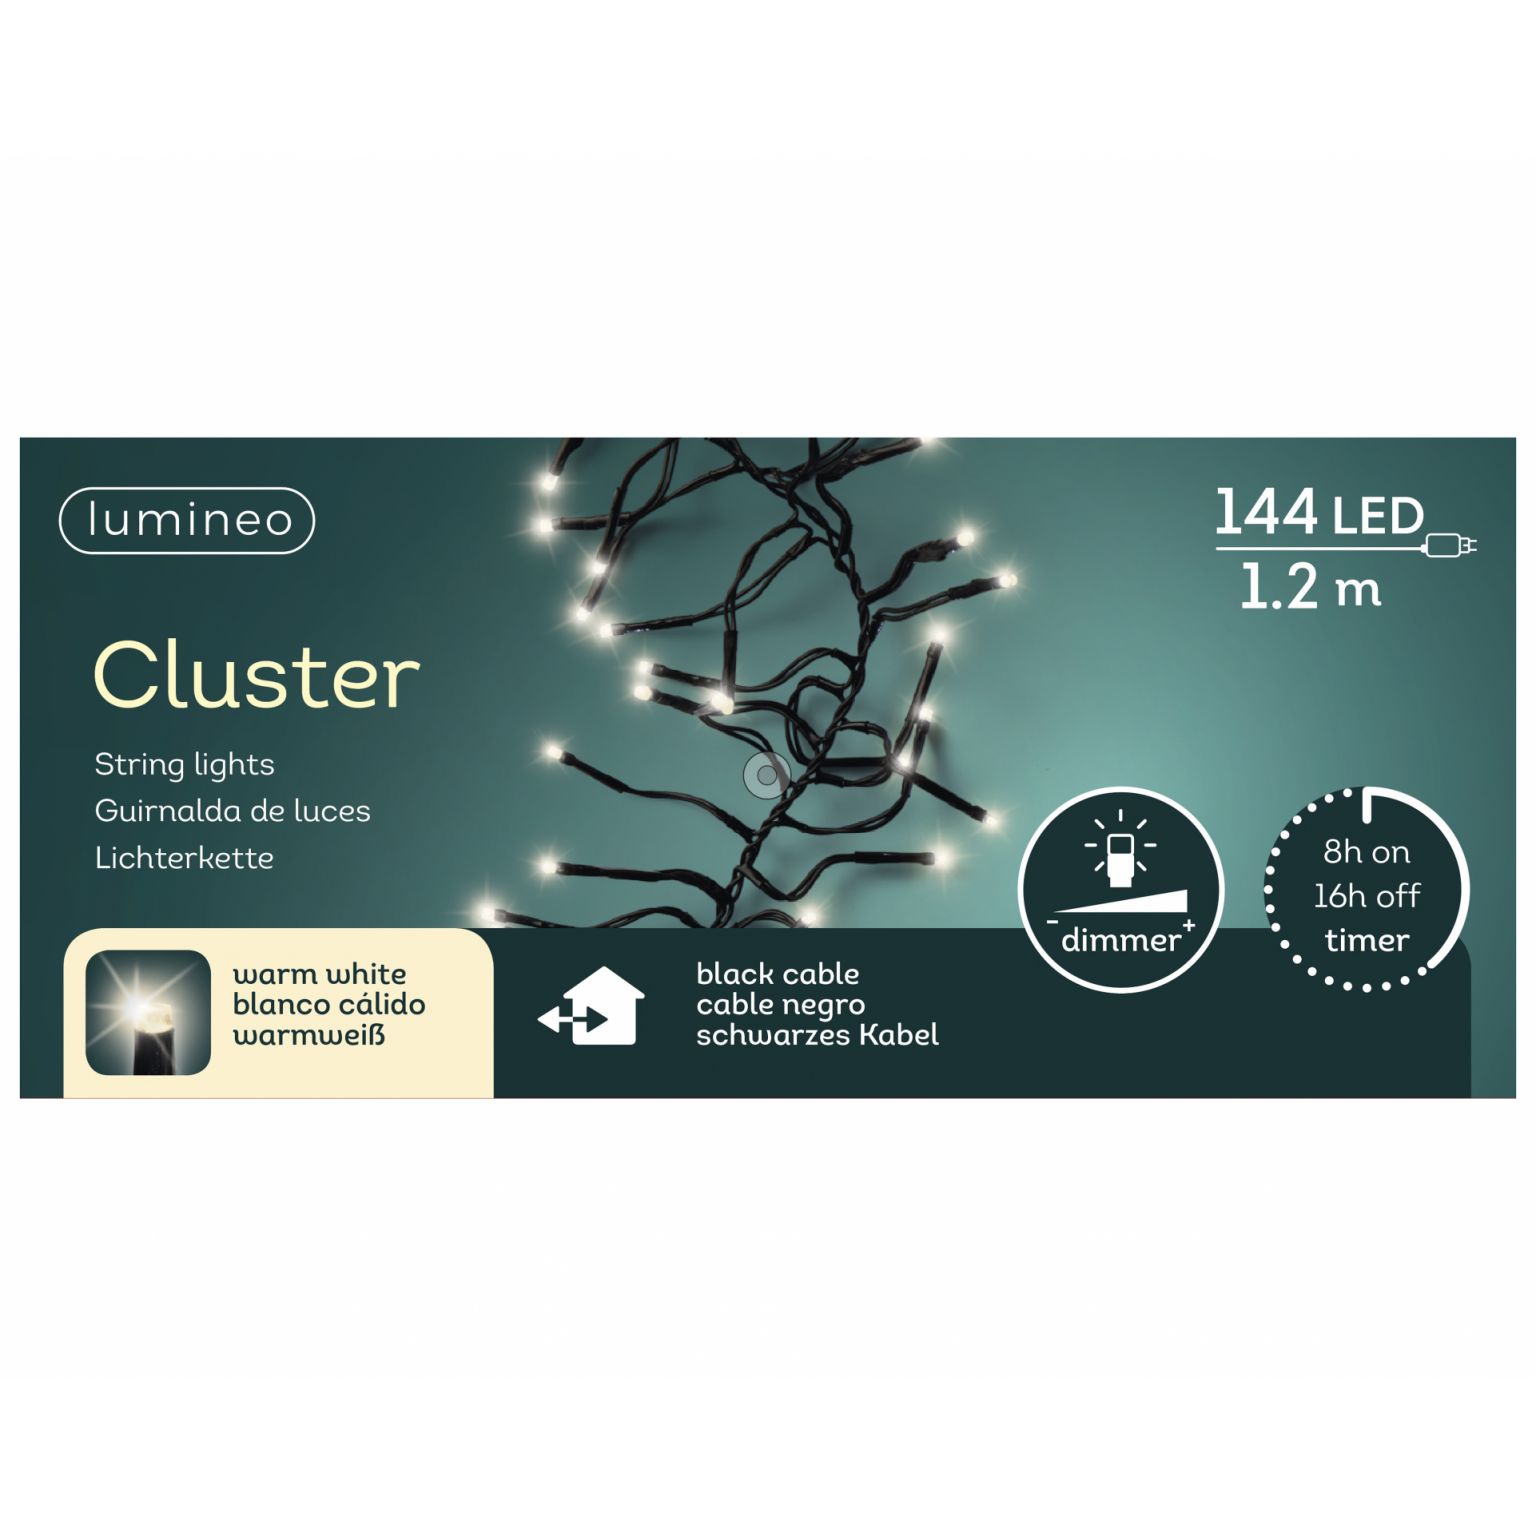 Clusterverlichting lumineo 144-lamps LED 'warm wit'